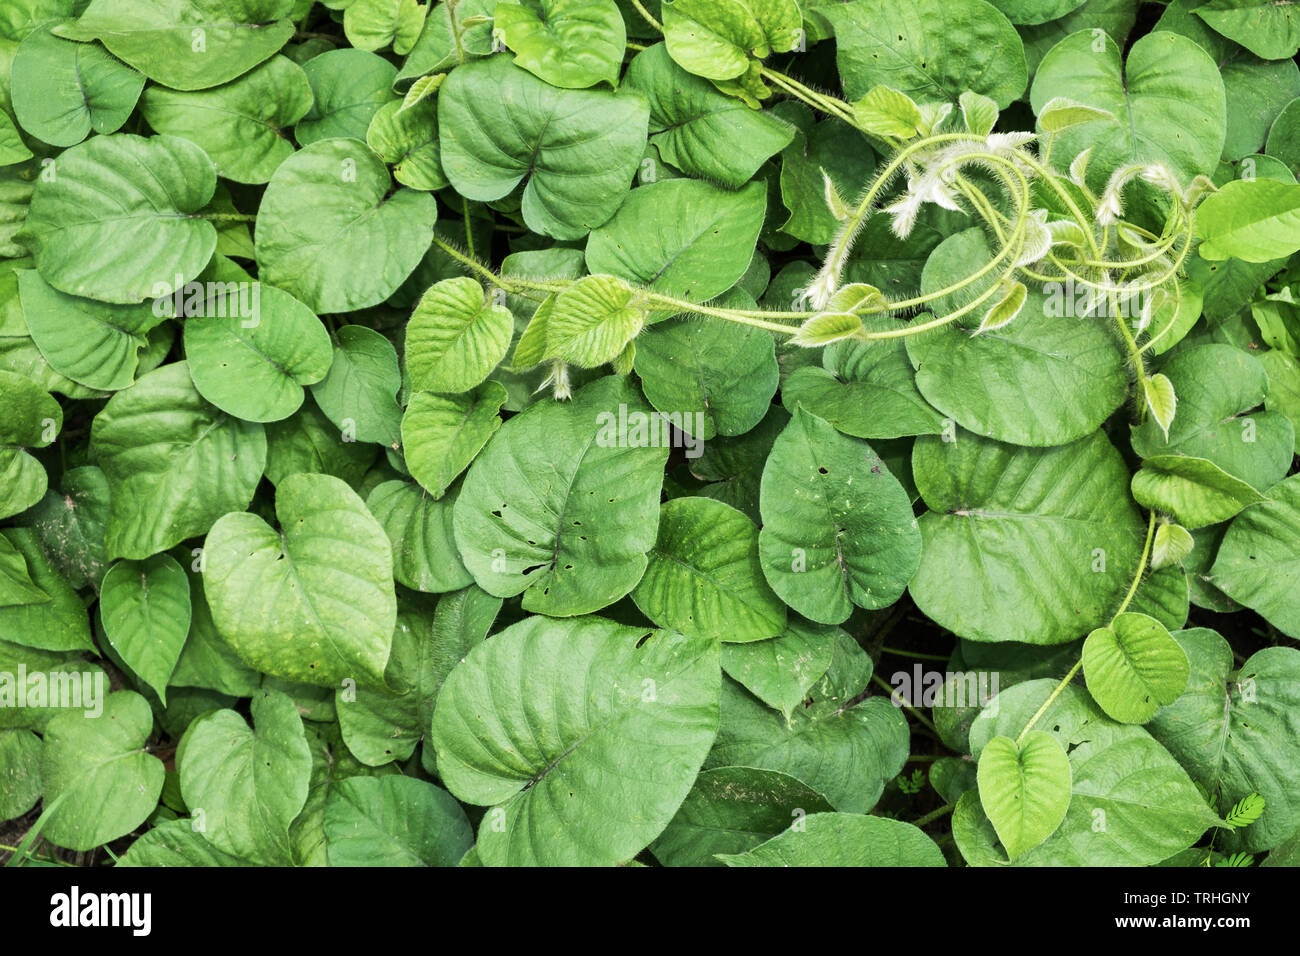 Green Leaves vine texture background Stock Photo